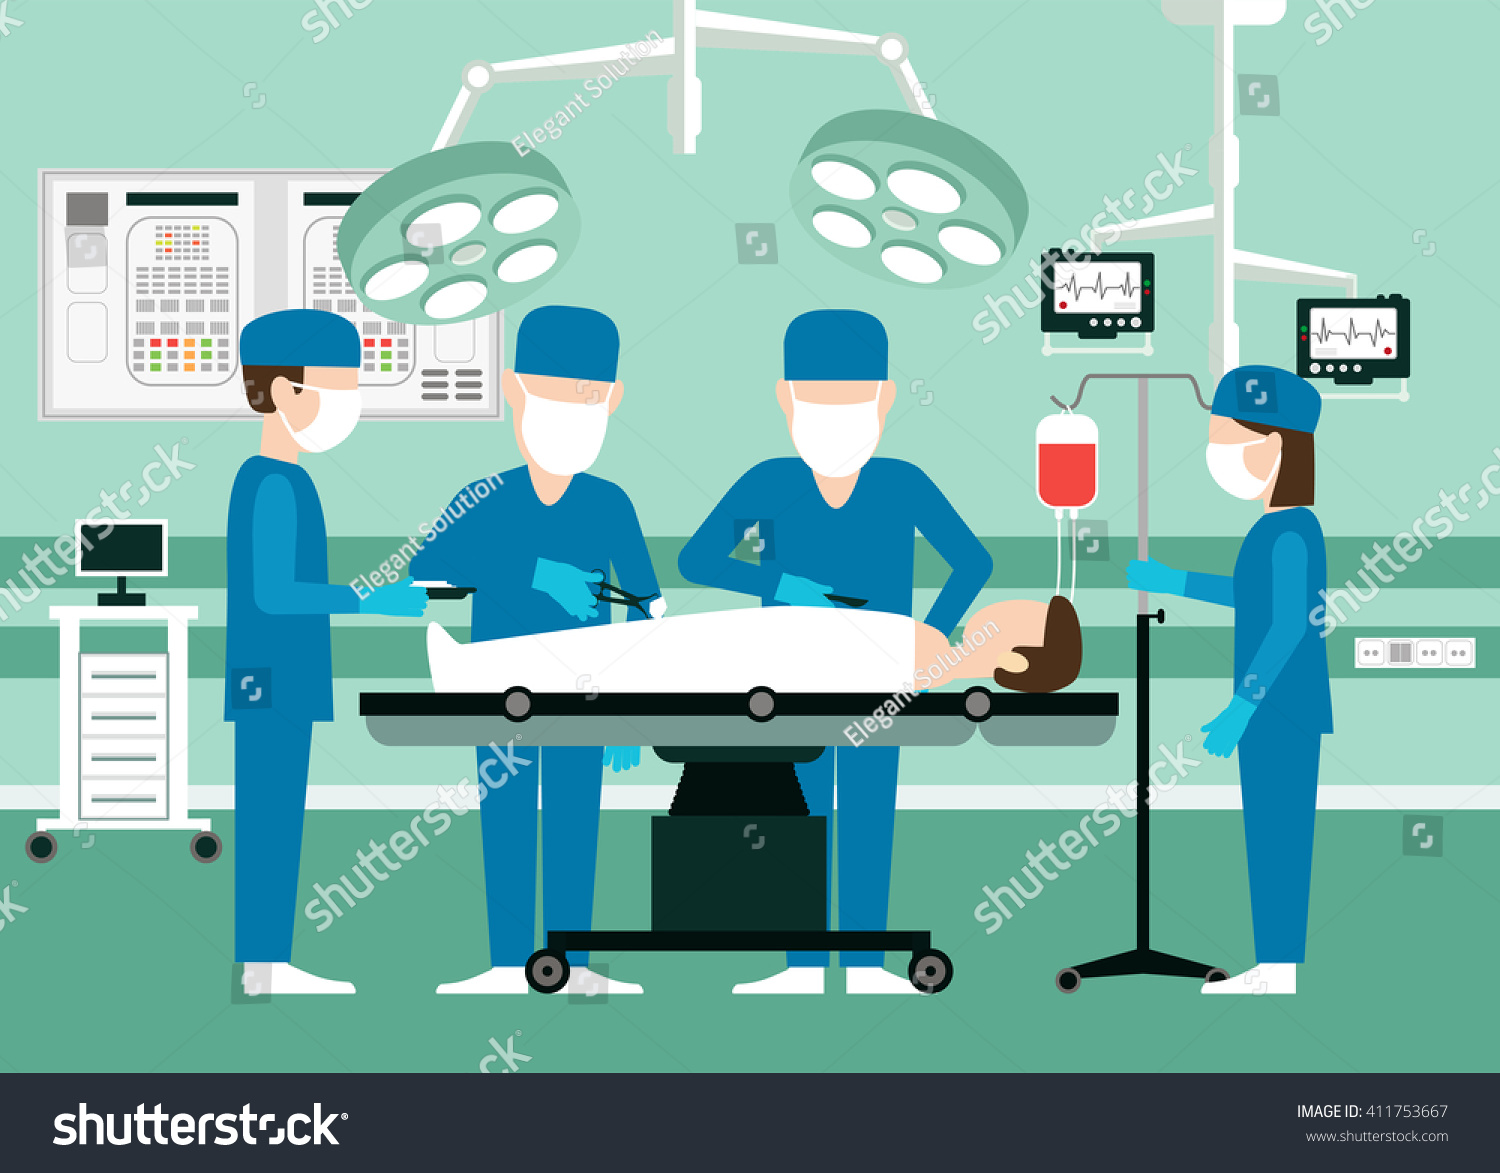 operating room clipart - photo #15